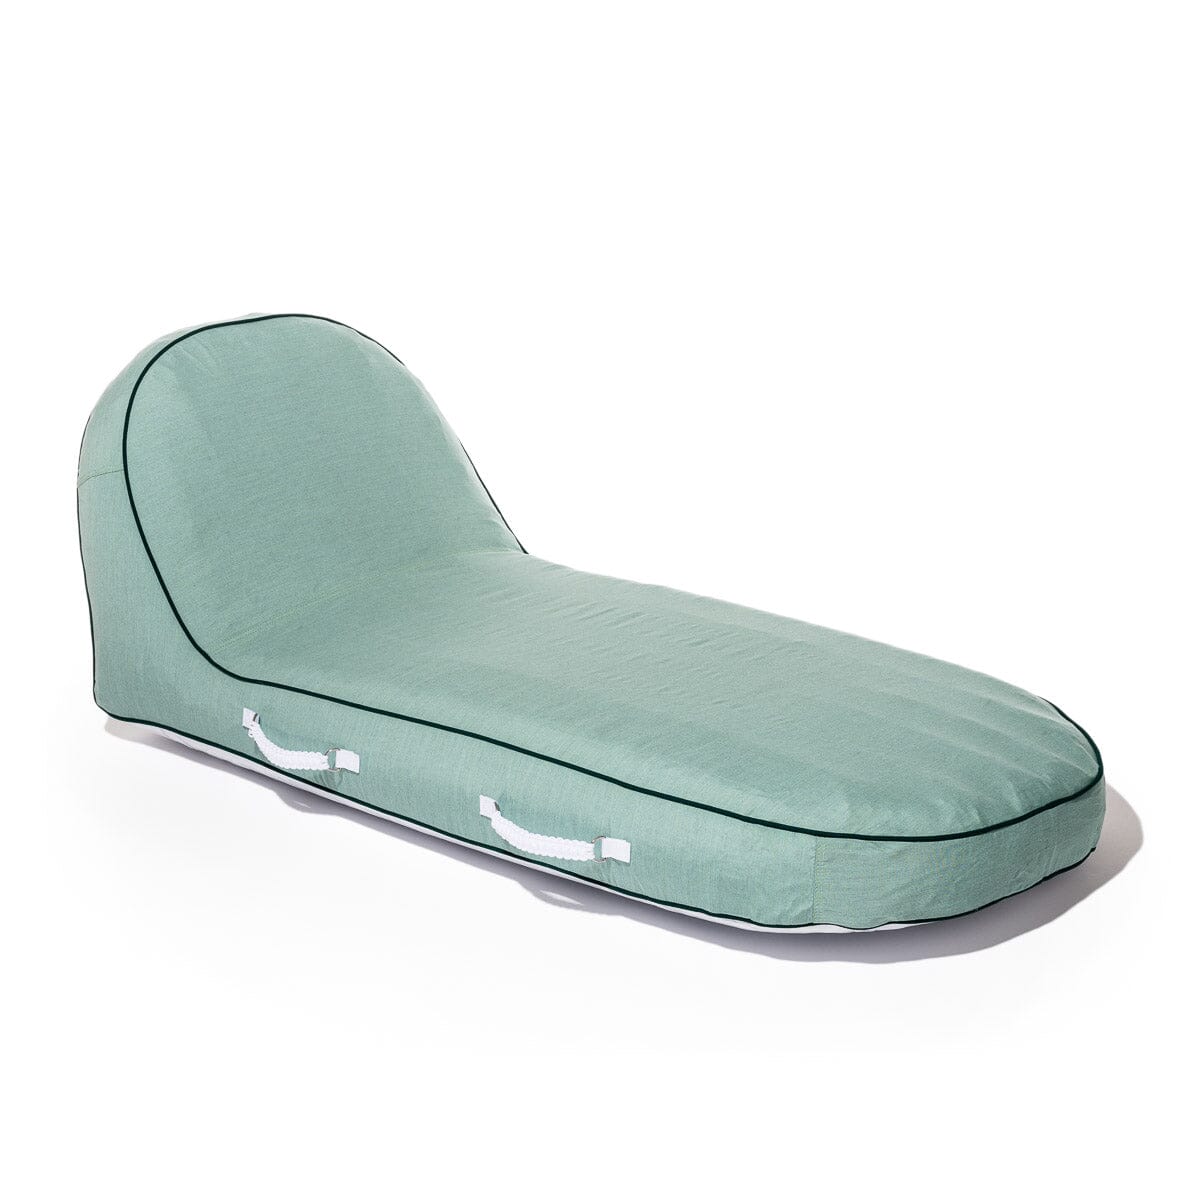 The Pool Lounger - Rivie Green Pool Lounger Business & Pleasure Co. 